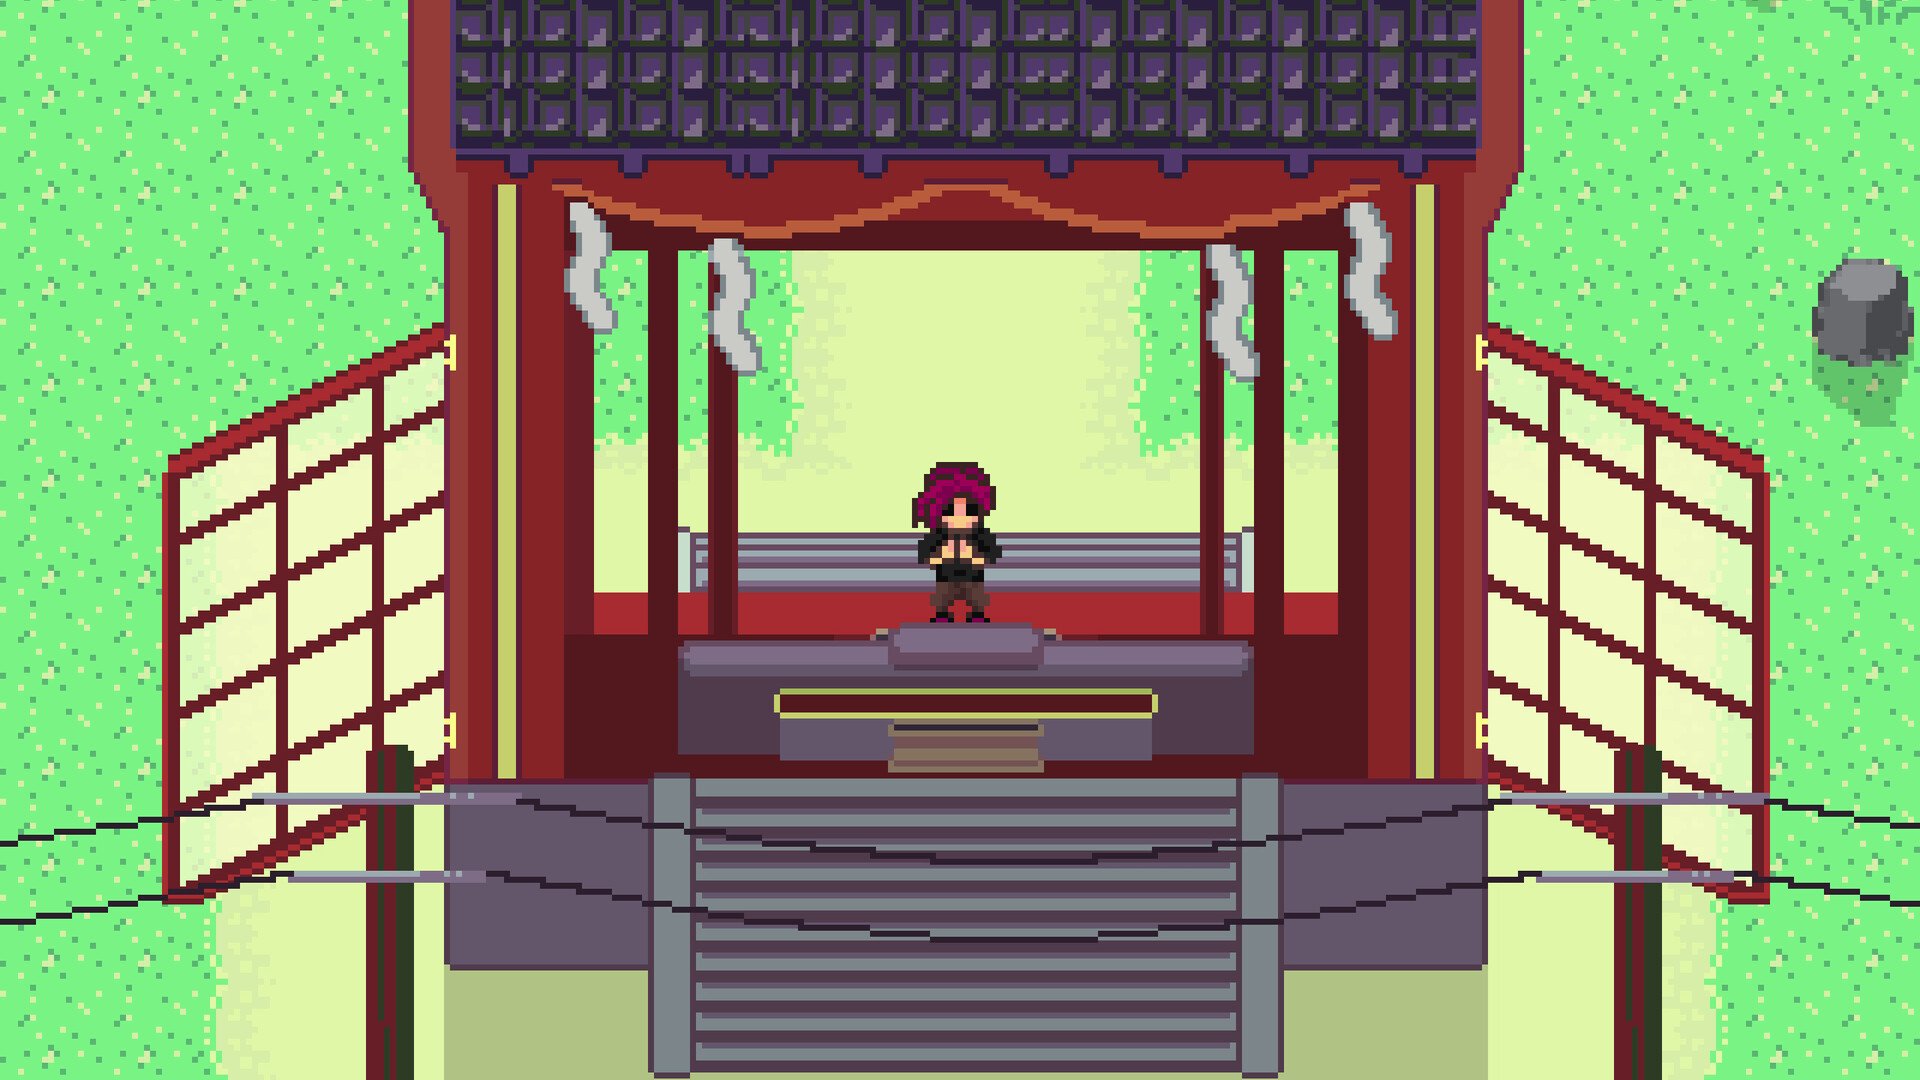 A character from the game Kagami standing on a piazza